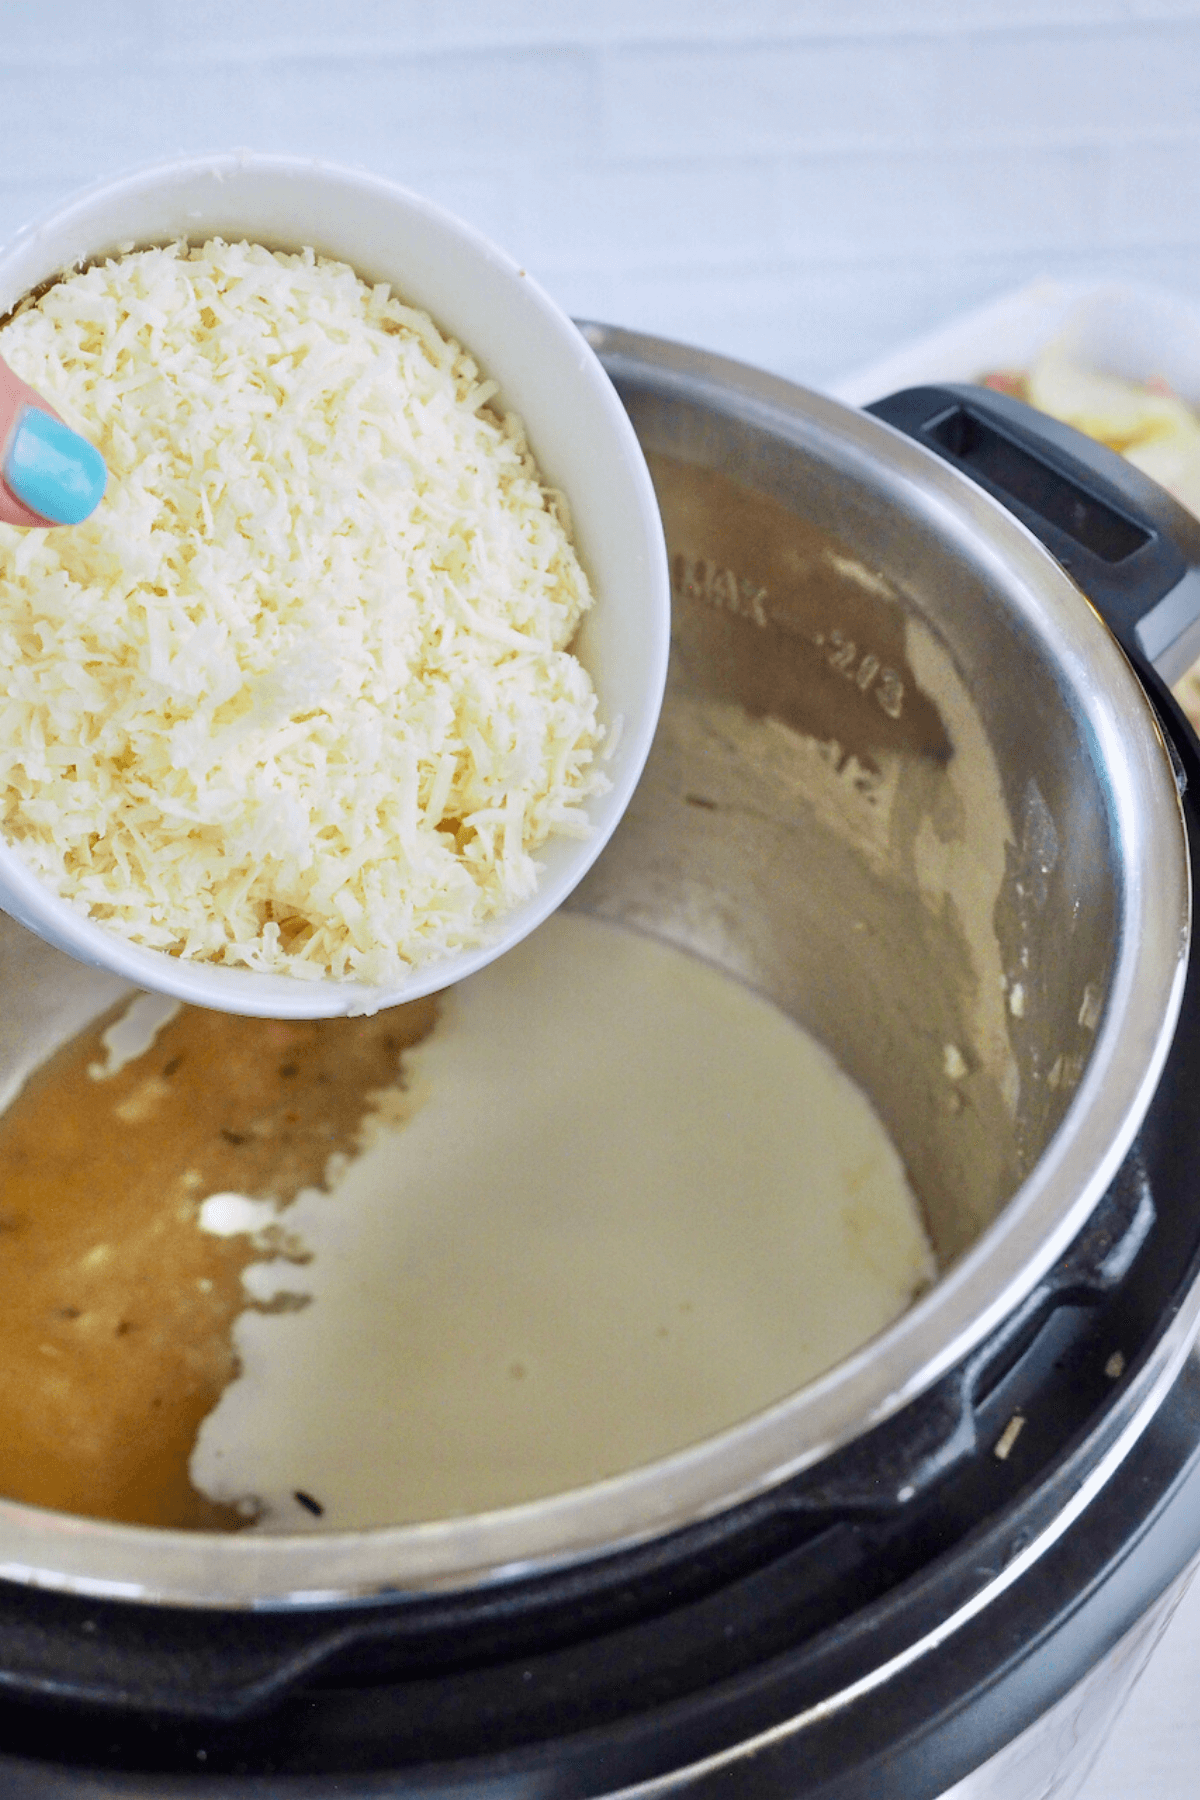 Stir in 1 ½ cups of shredded cheese, stir until smooth and melted. 